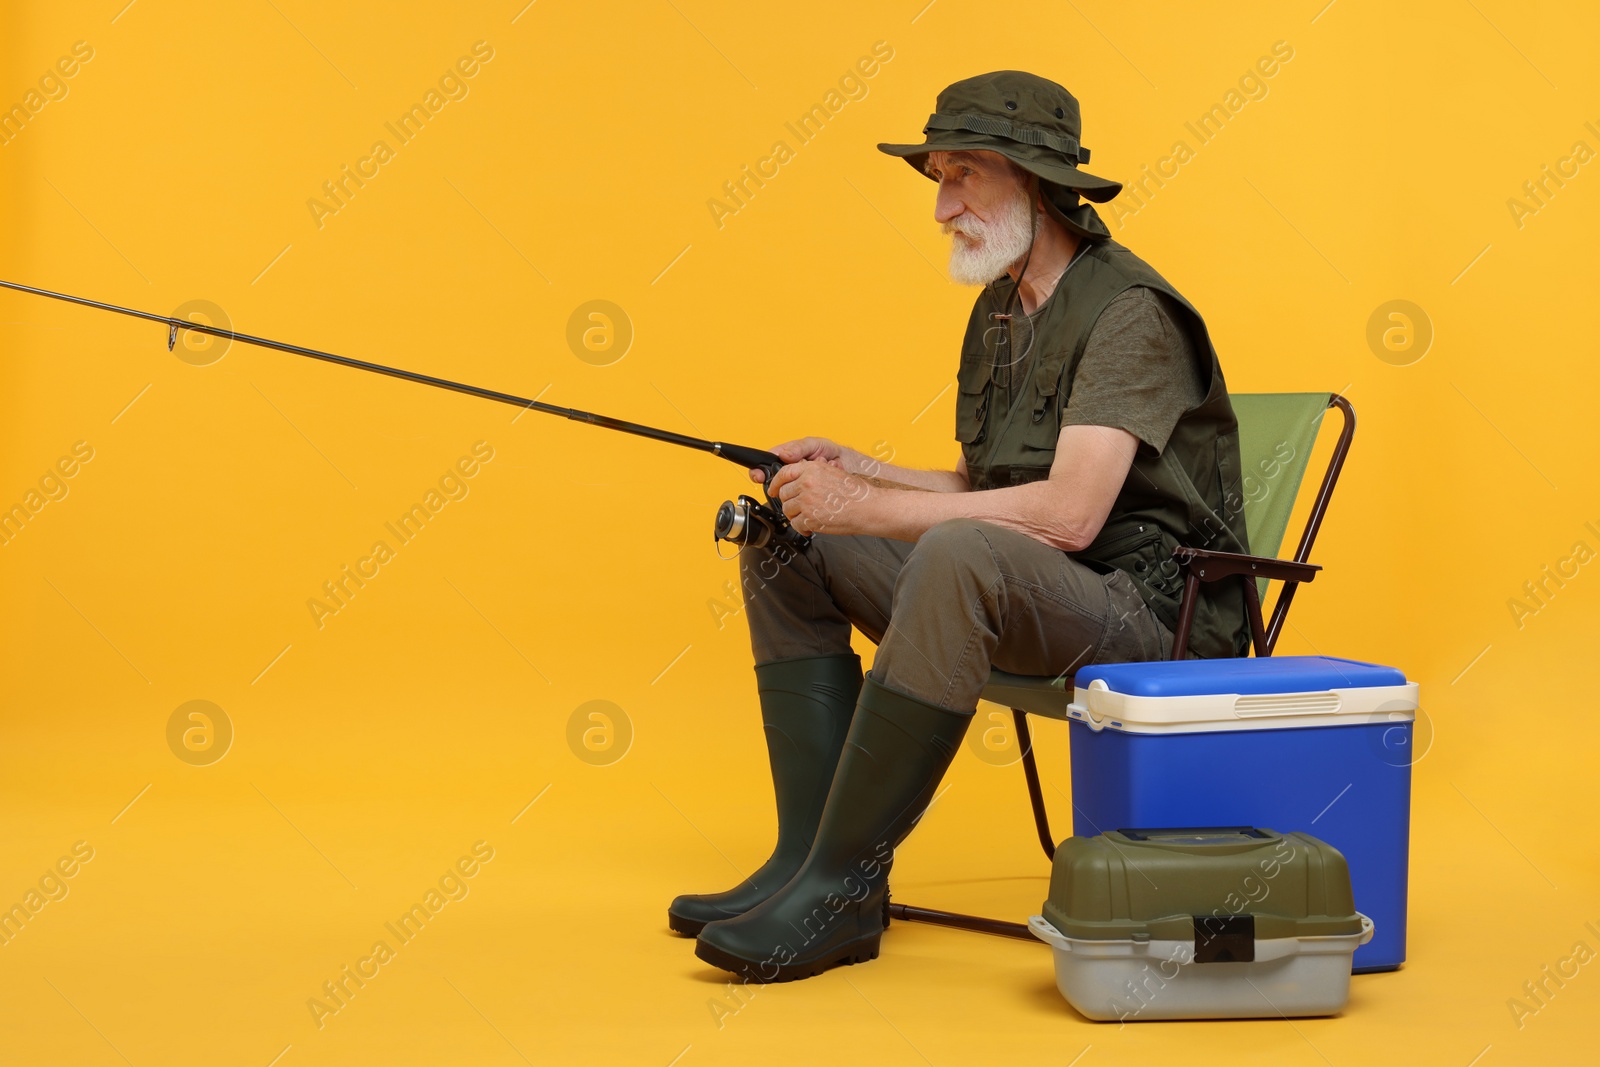 Photo of Fisherman with fishing rod on chair against yellow background